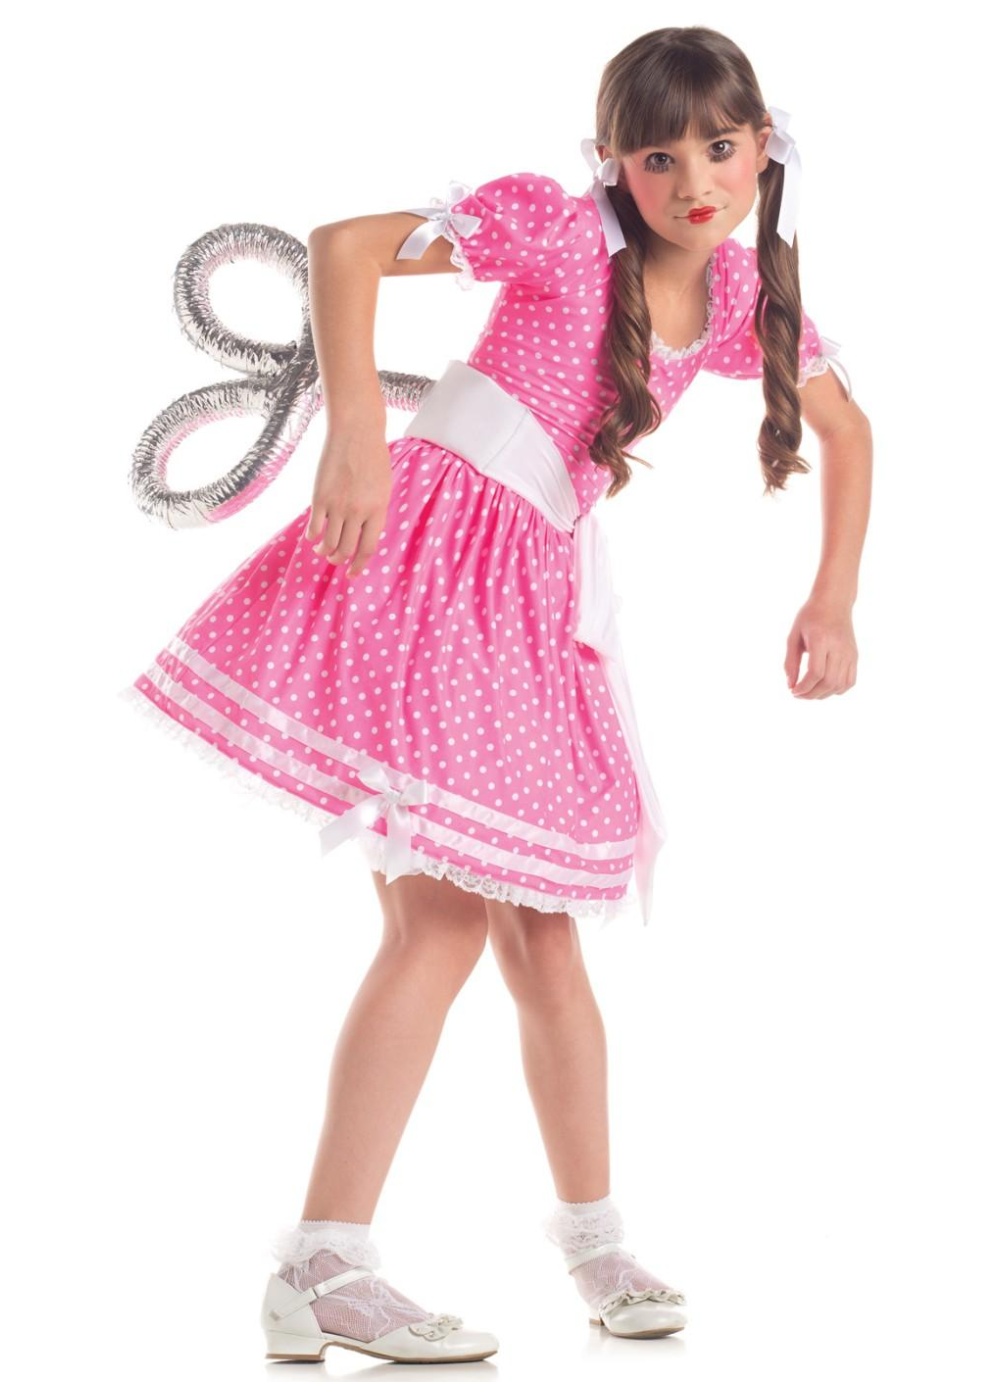  Girls Toy Doll Costume